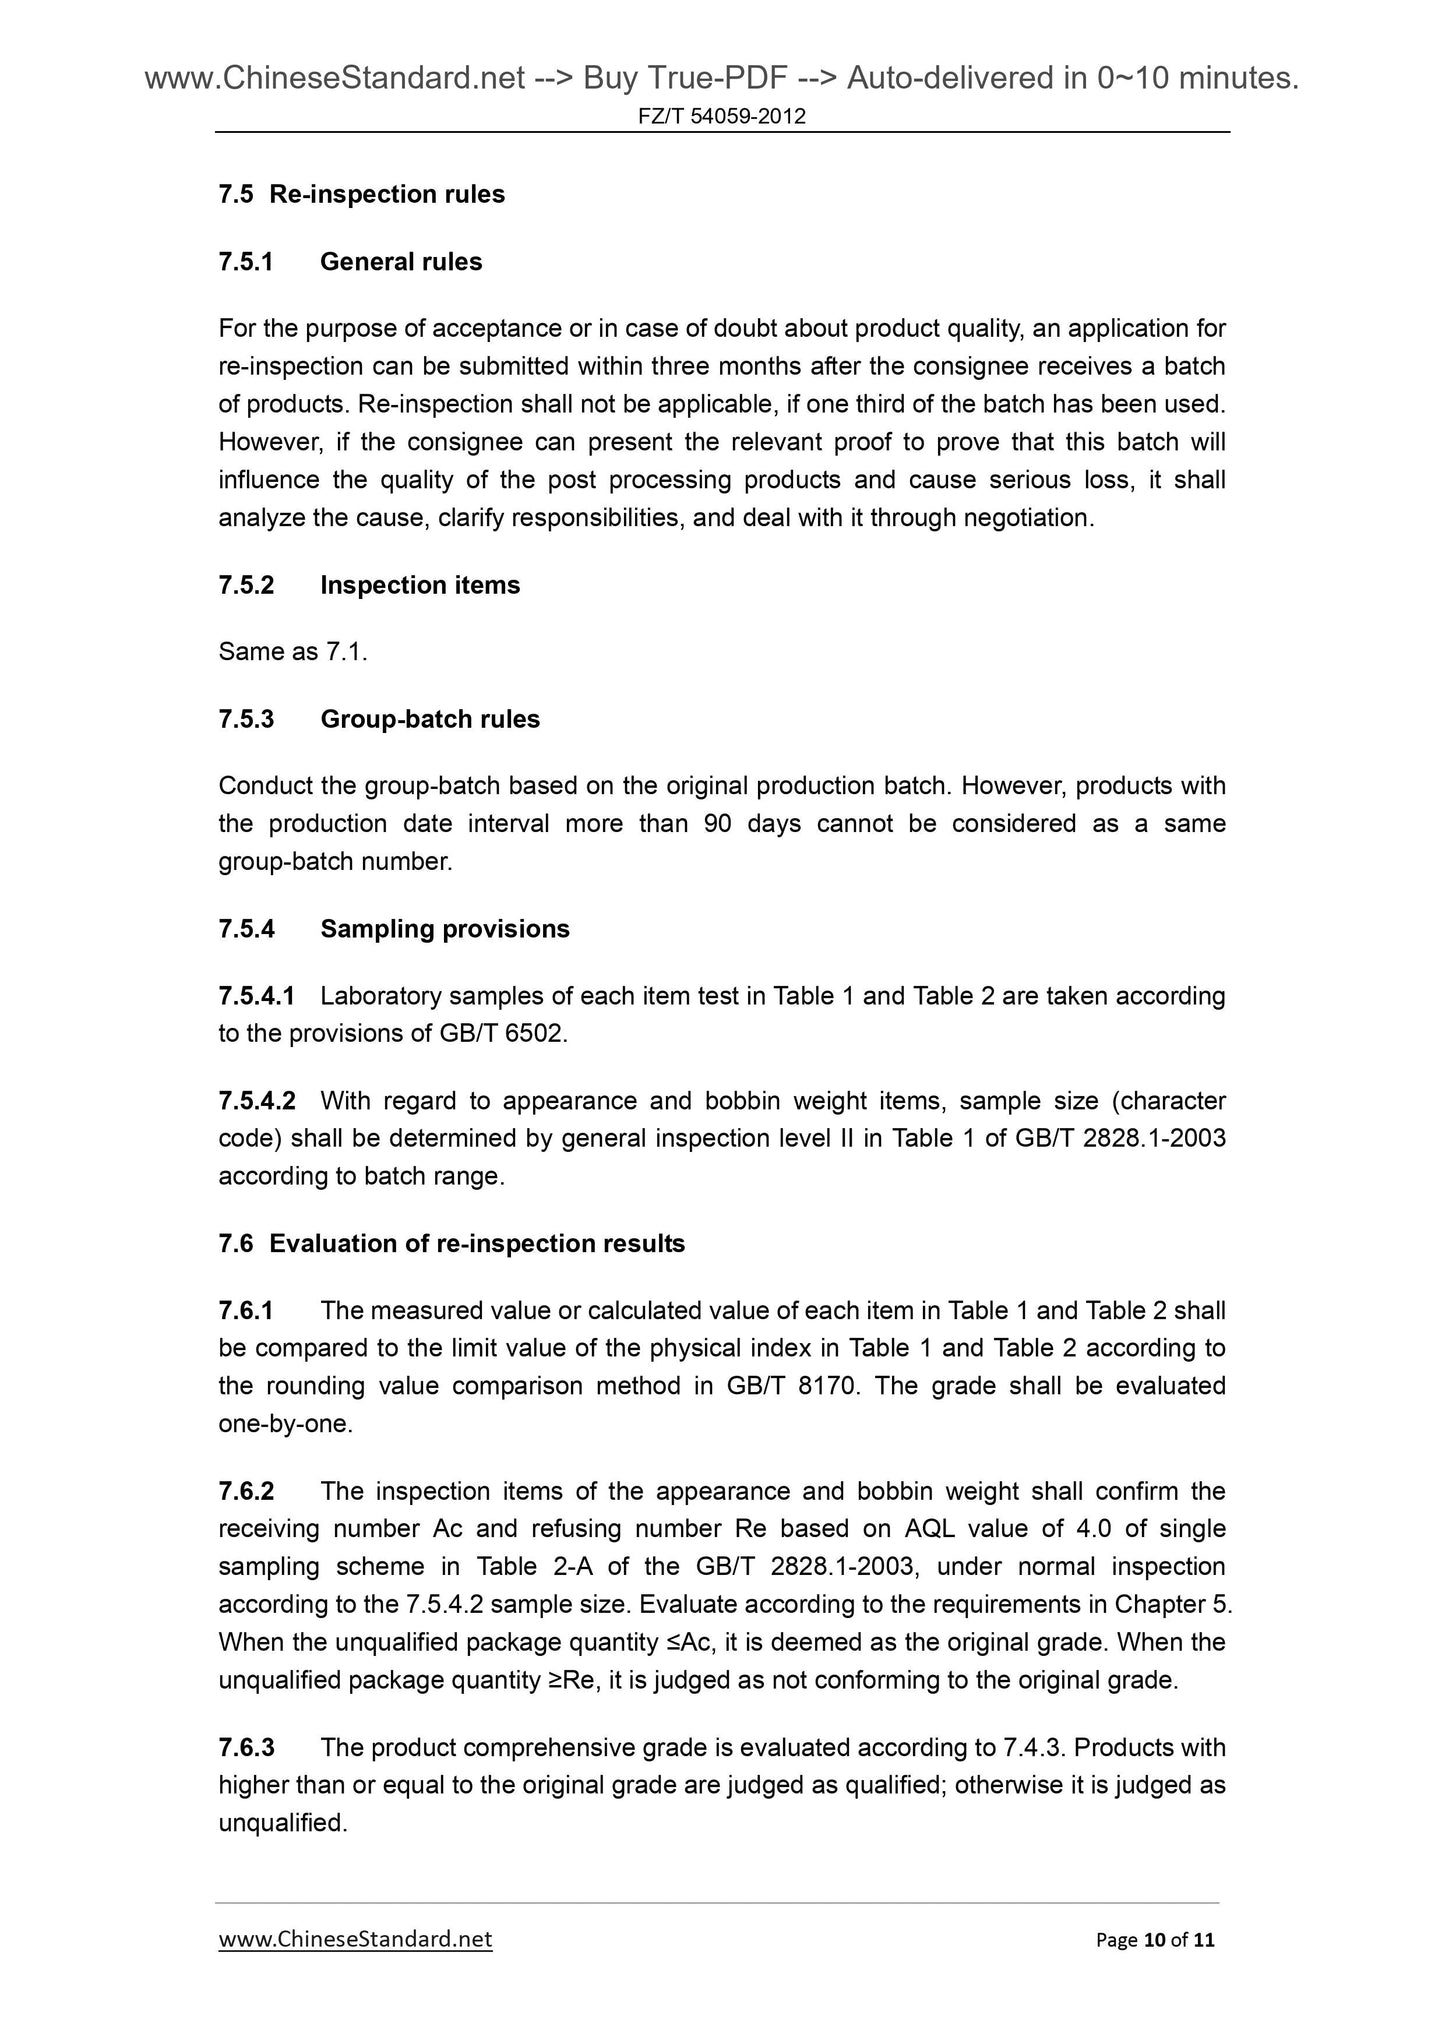 FZ/T 54059-2012 Page 6